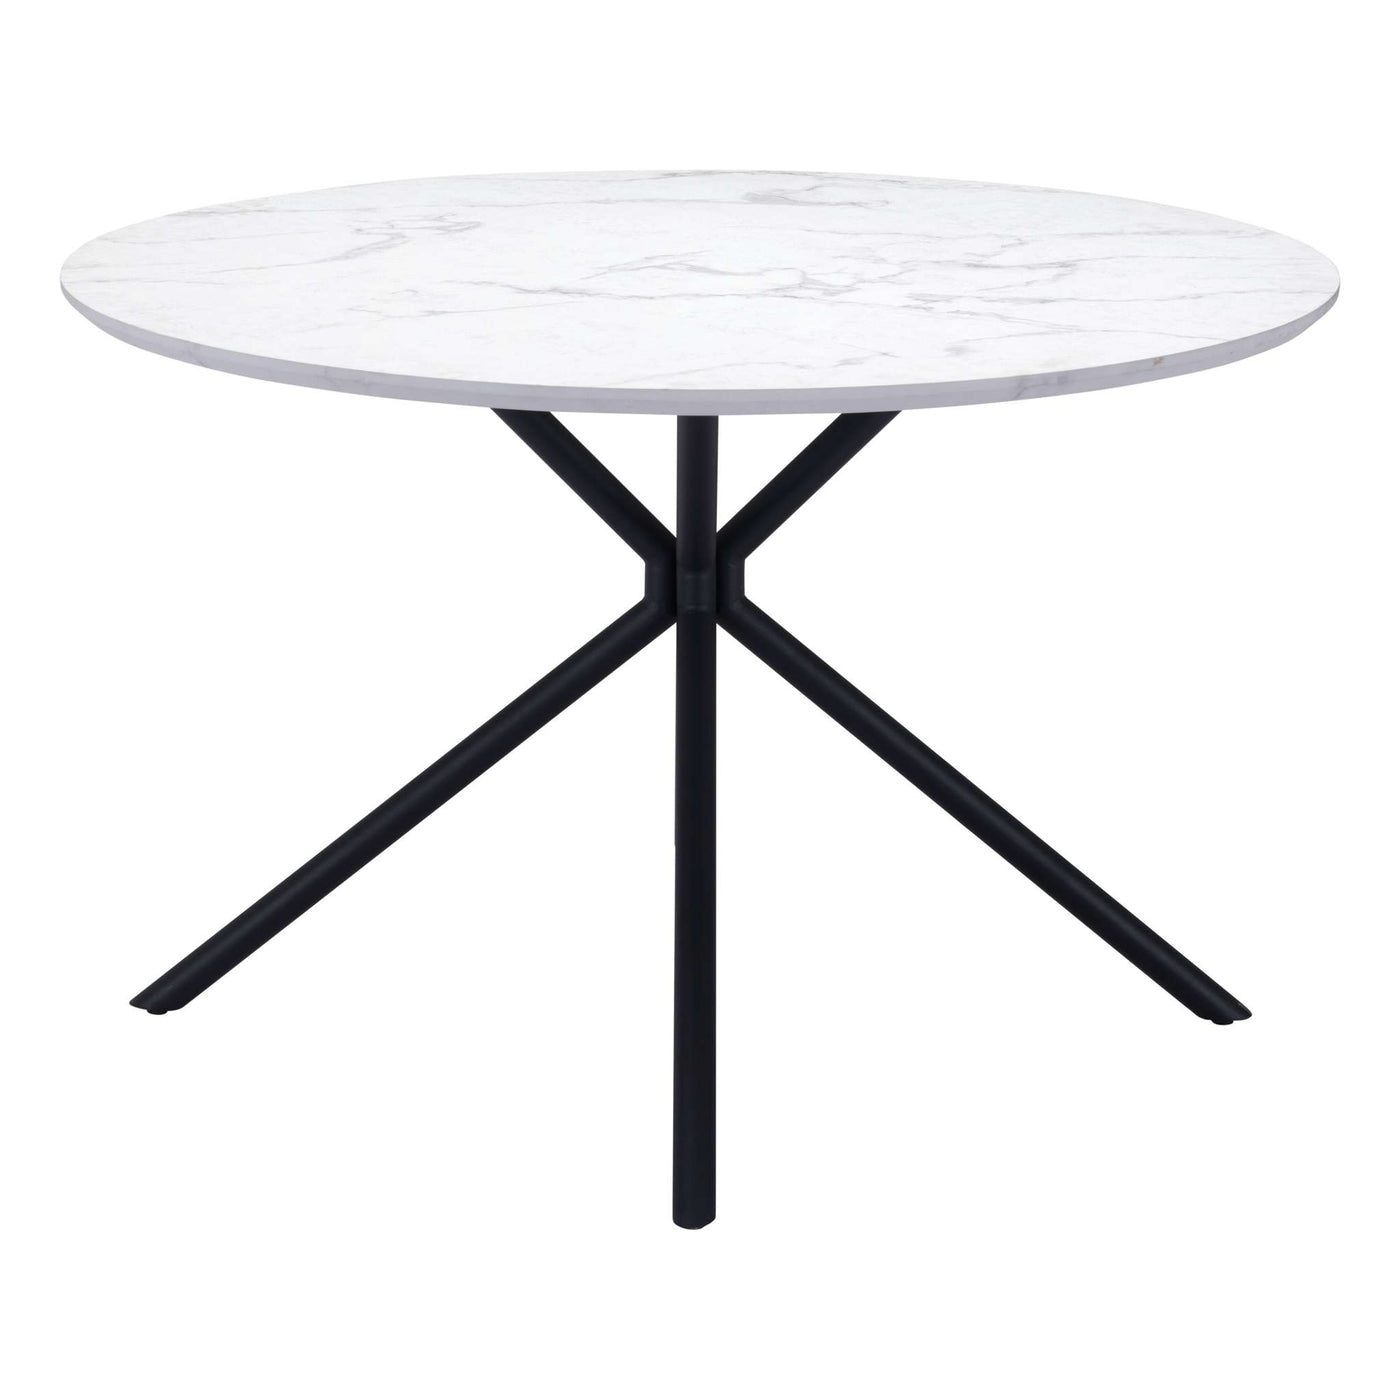 Zuo Mod Amiens Dining Table